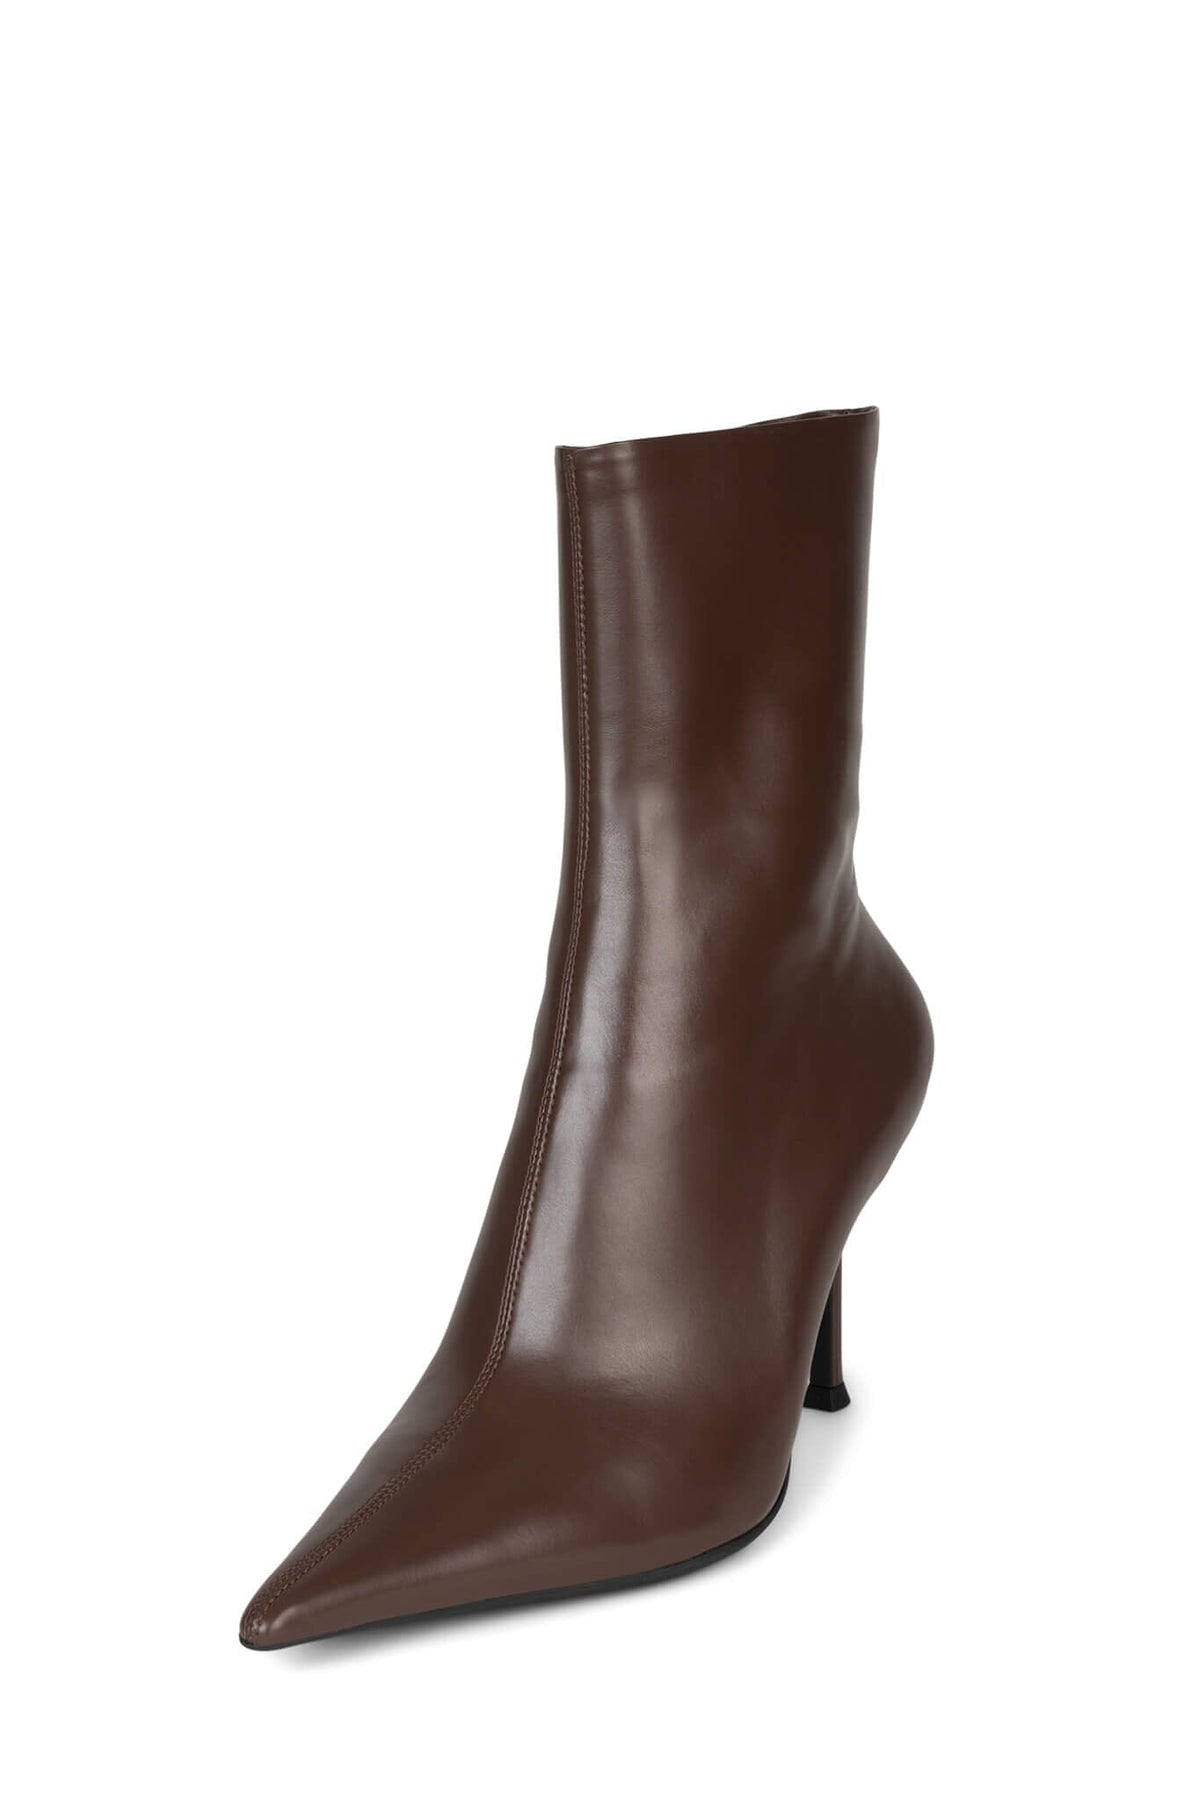 DARING Jeffrey Campbell Ankle Booties Coffee